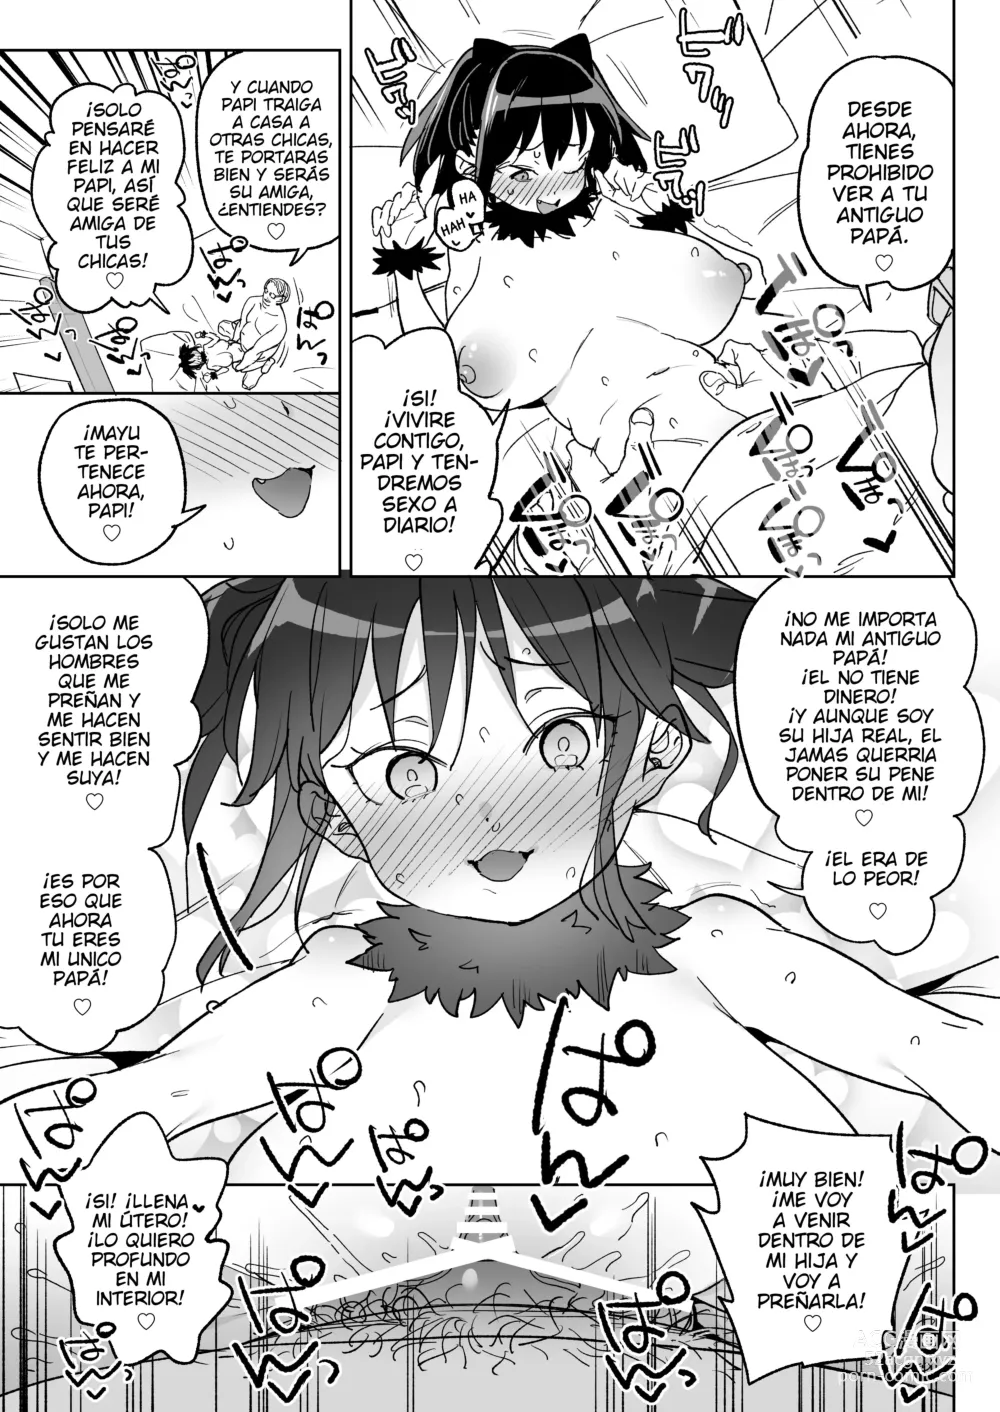 Page 34 of doujinshi November 28th: As of today, I belong to my new daddy!